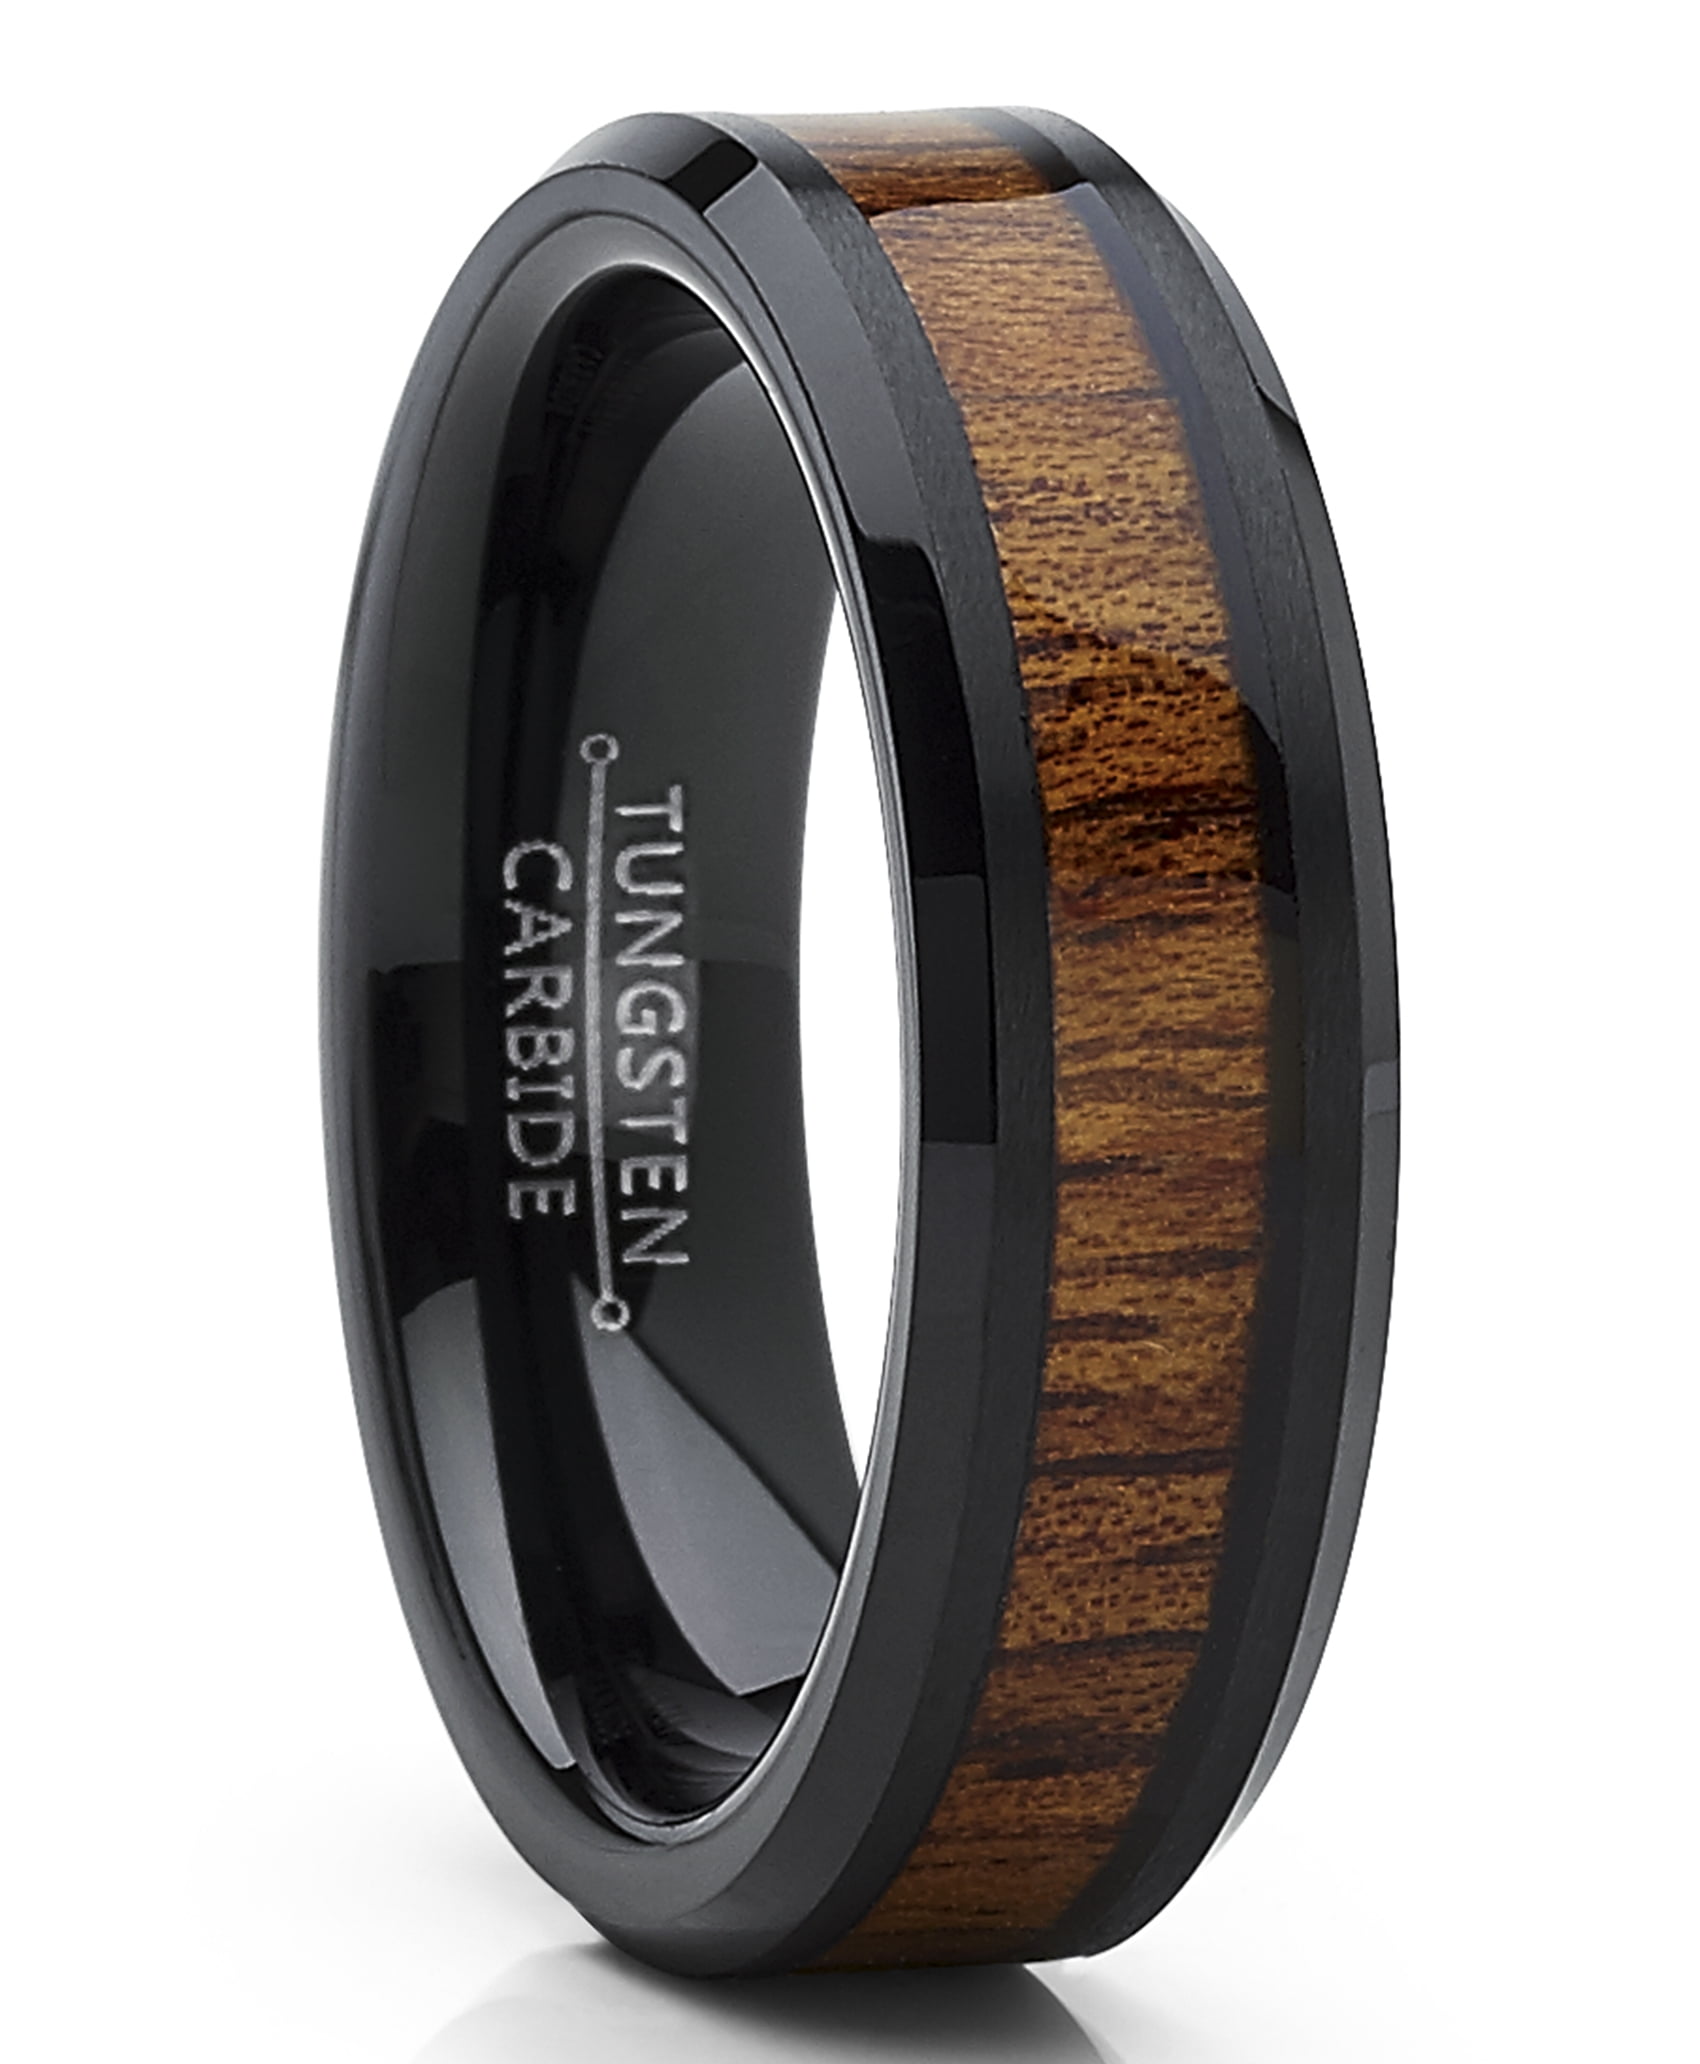 Black Ceramic Wedding Ring with Real Rosewood Inlay and Polished Beveled Edges 6mm Band 